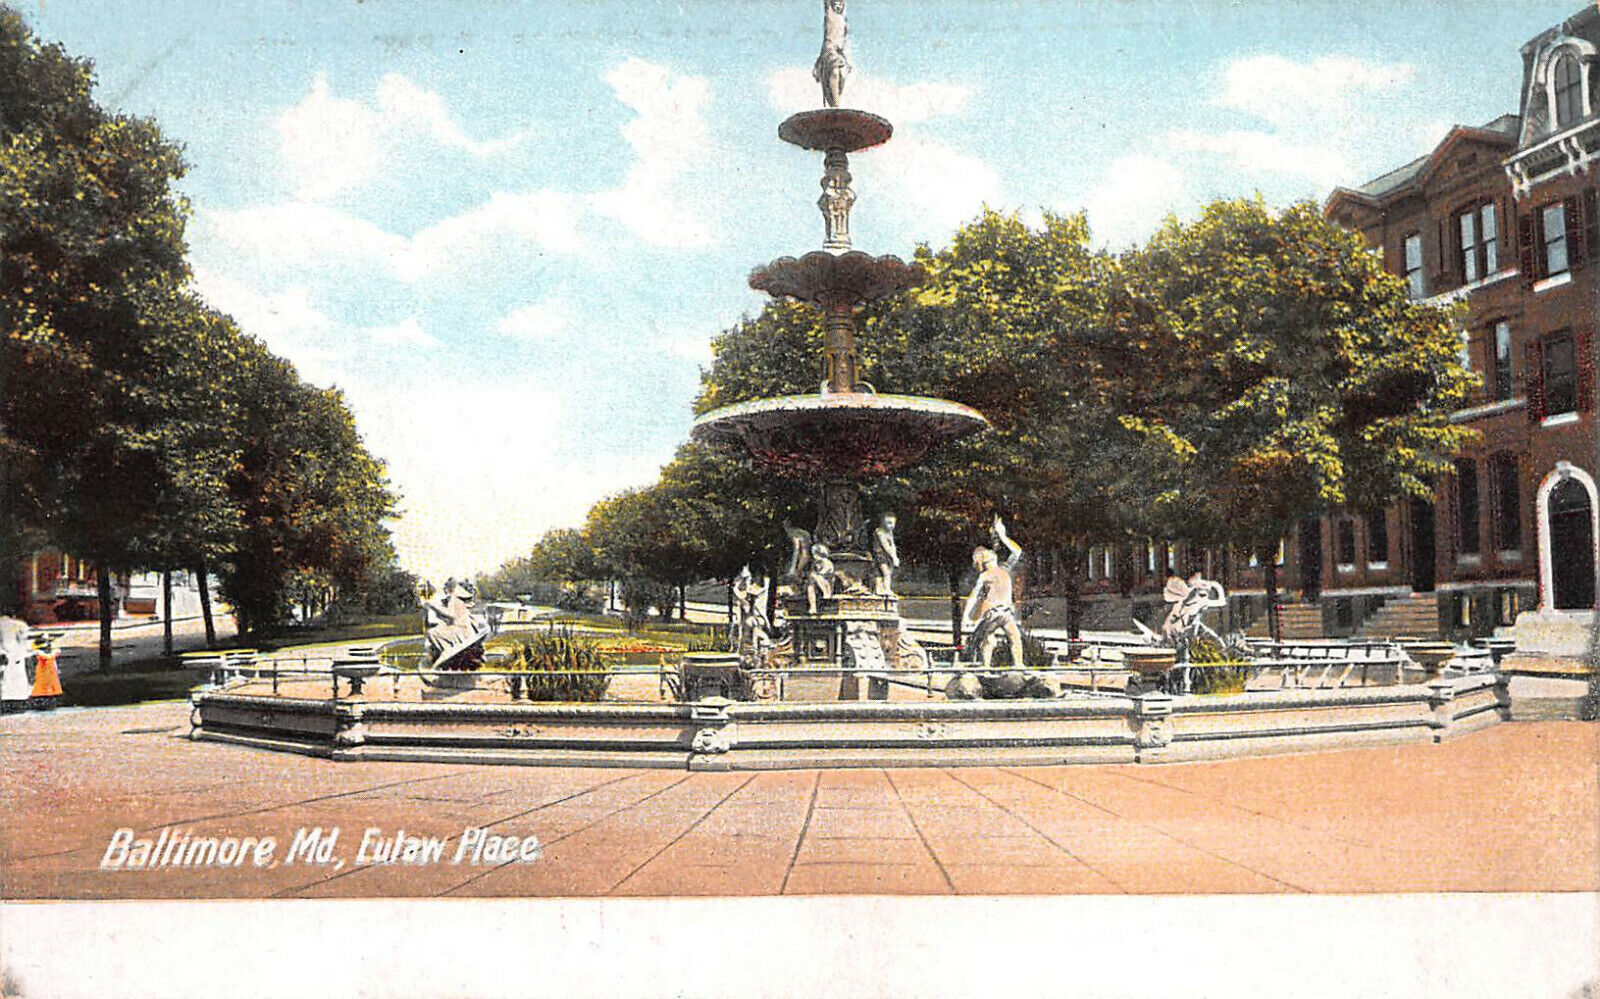 Eulaw Place, Baltimore, Maryland, Early Postcard, Unused